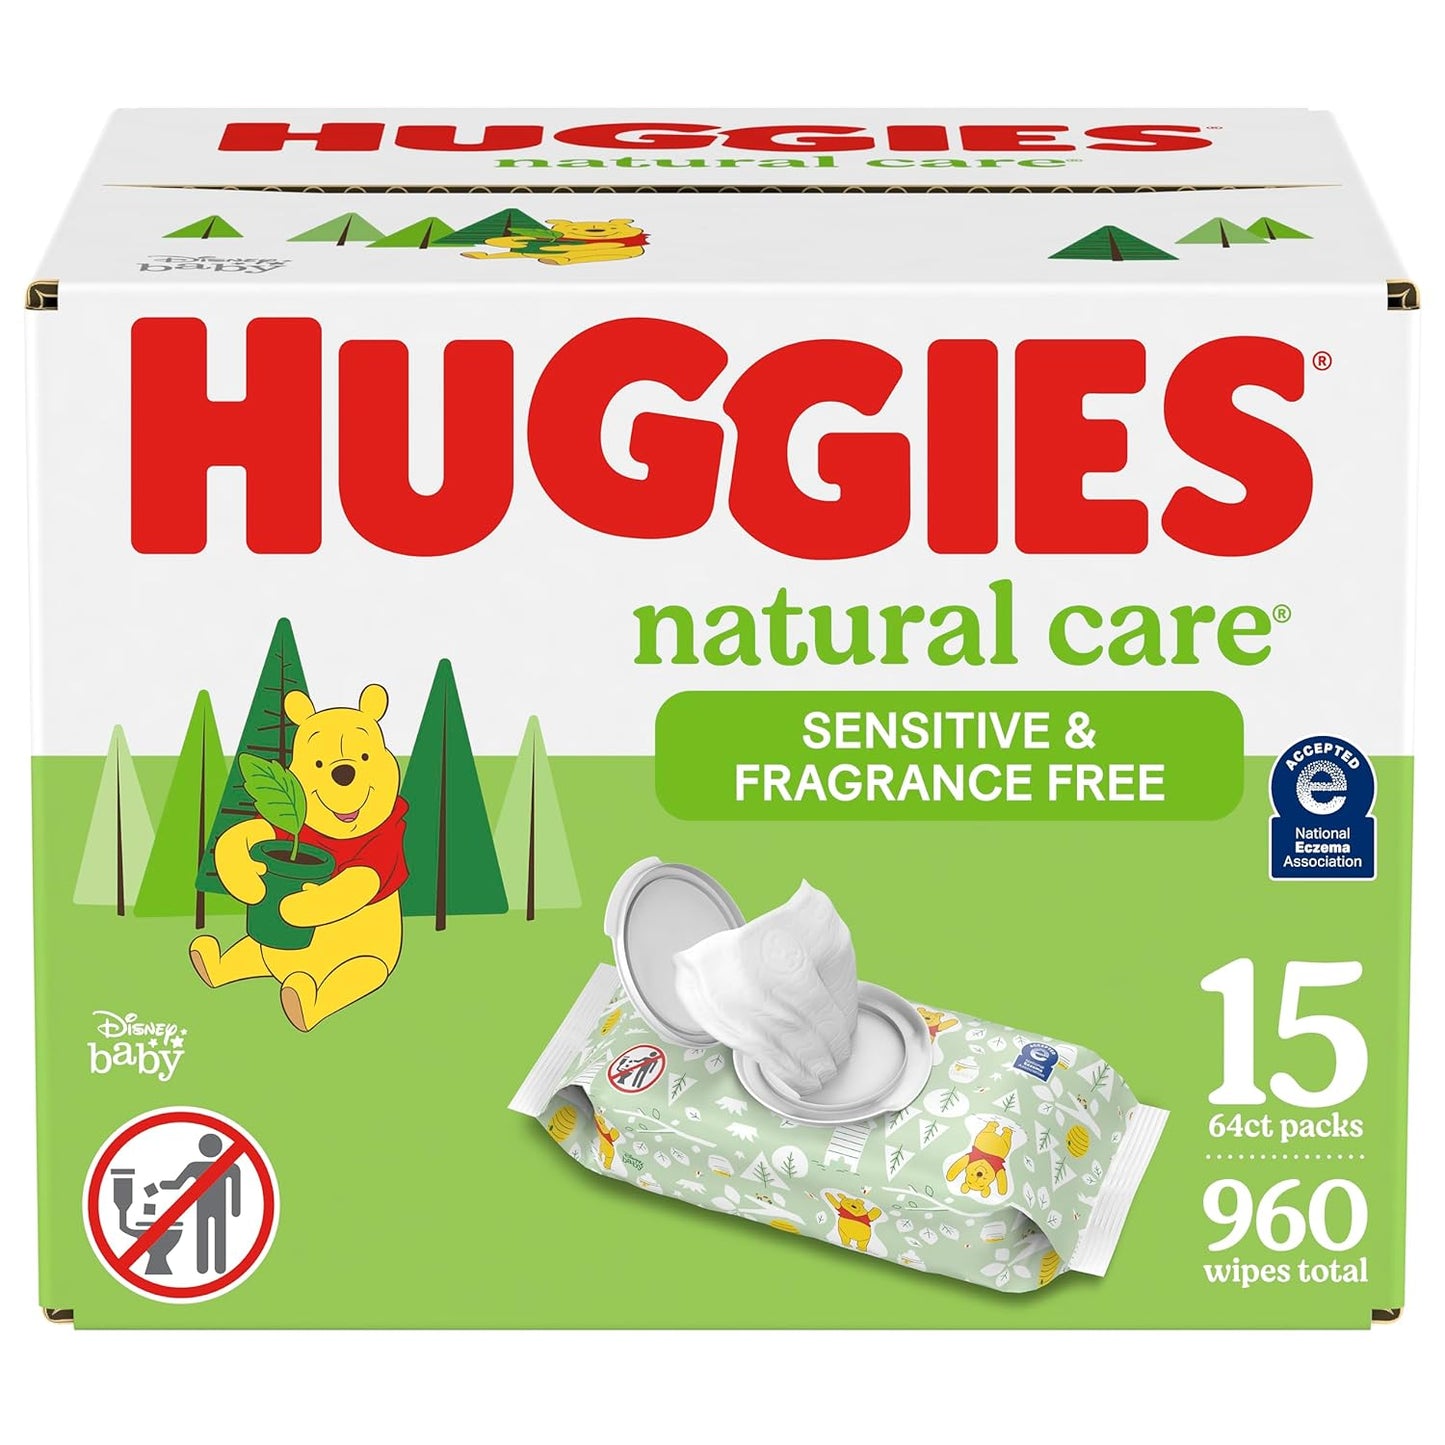 Huggies Natural Care Sensitive Baby Wipes, Unscented, Hypoallergenic, 99% Purified Water, 12 Flip-Top Packs (768 Wipes Total), Packaging May Vary